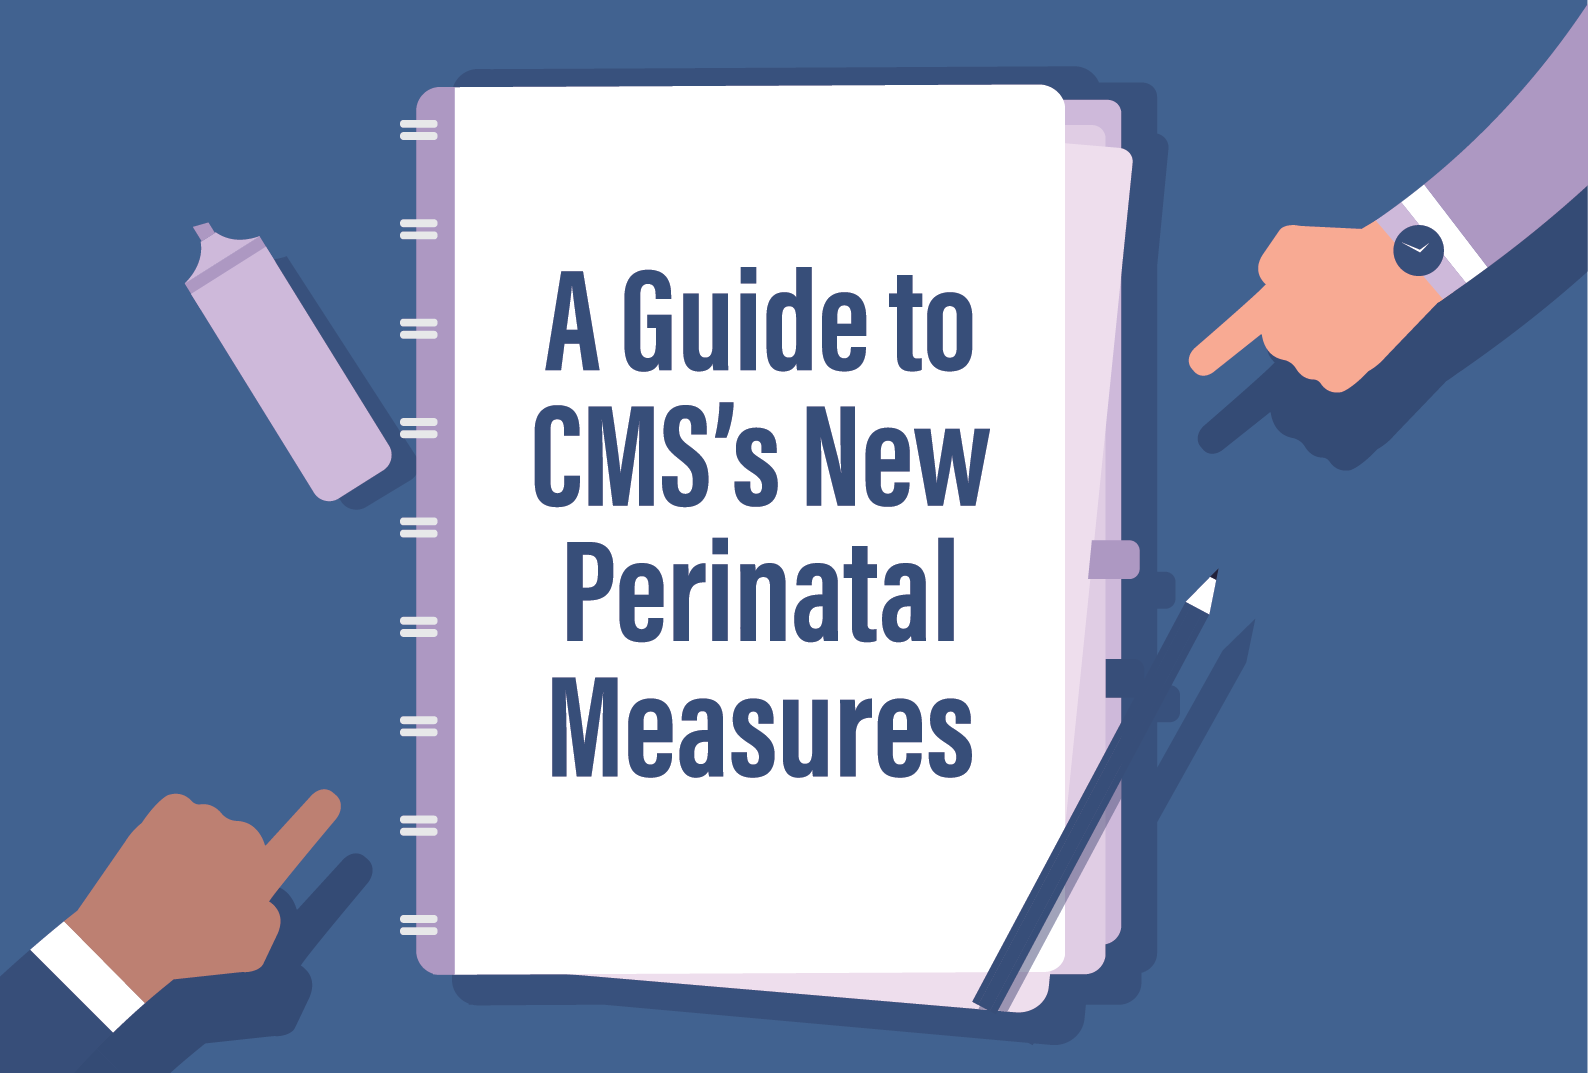 A Guide to CMS’s New Perinatal Measures